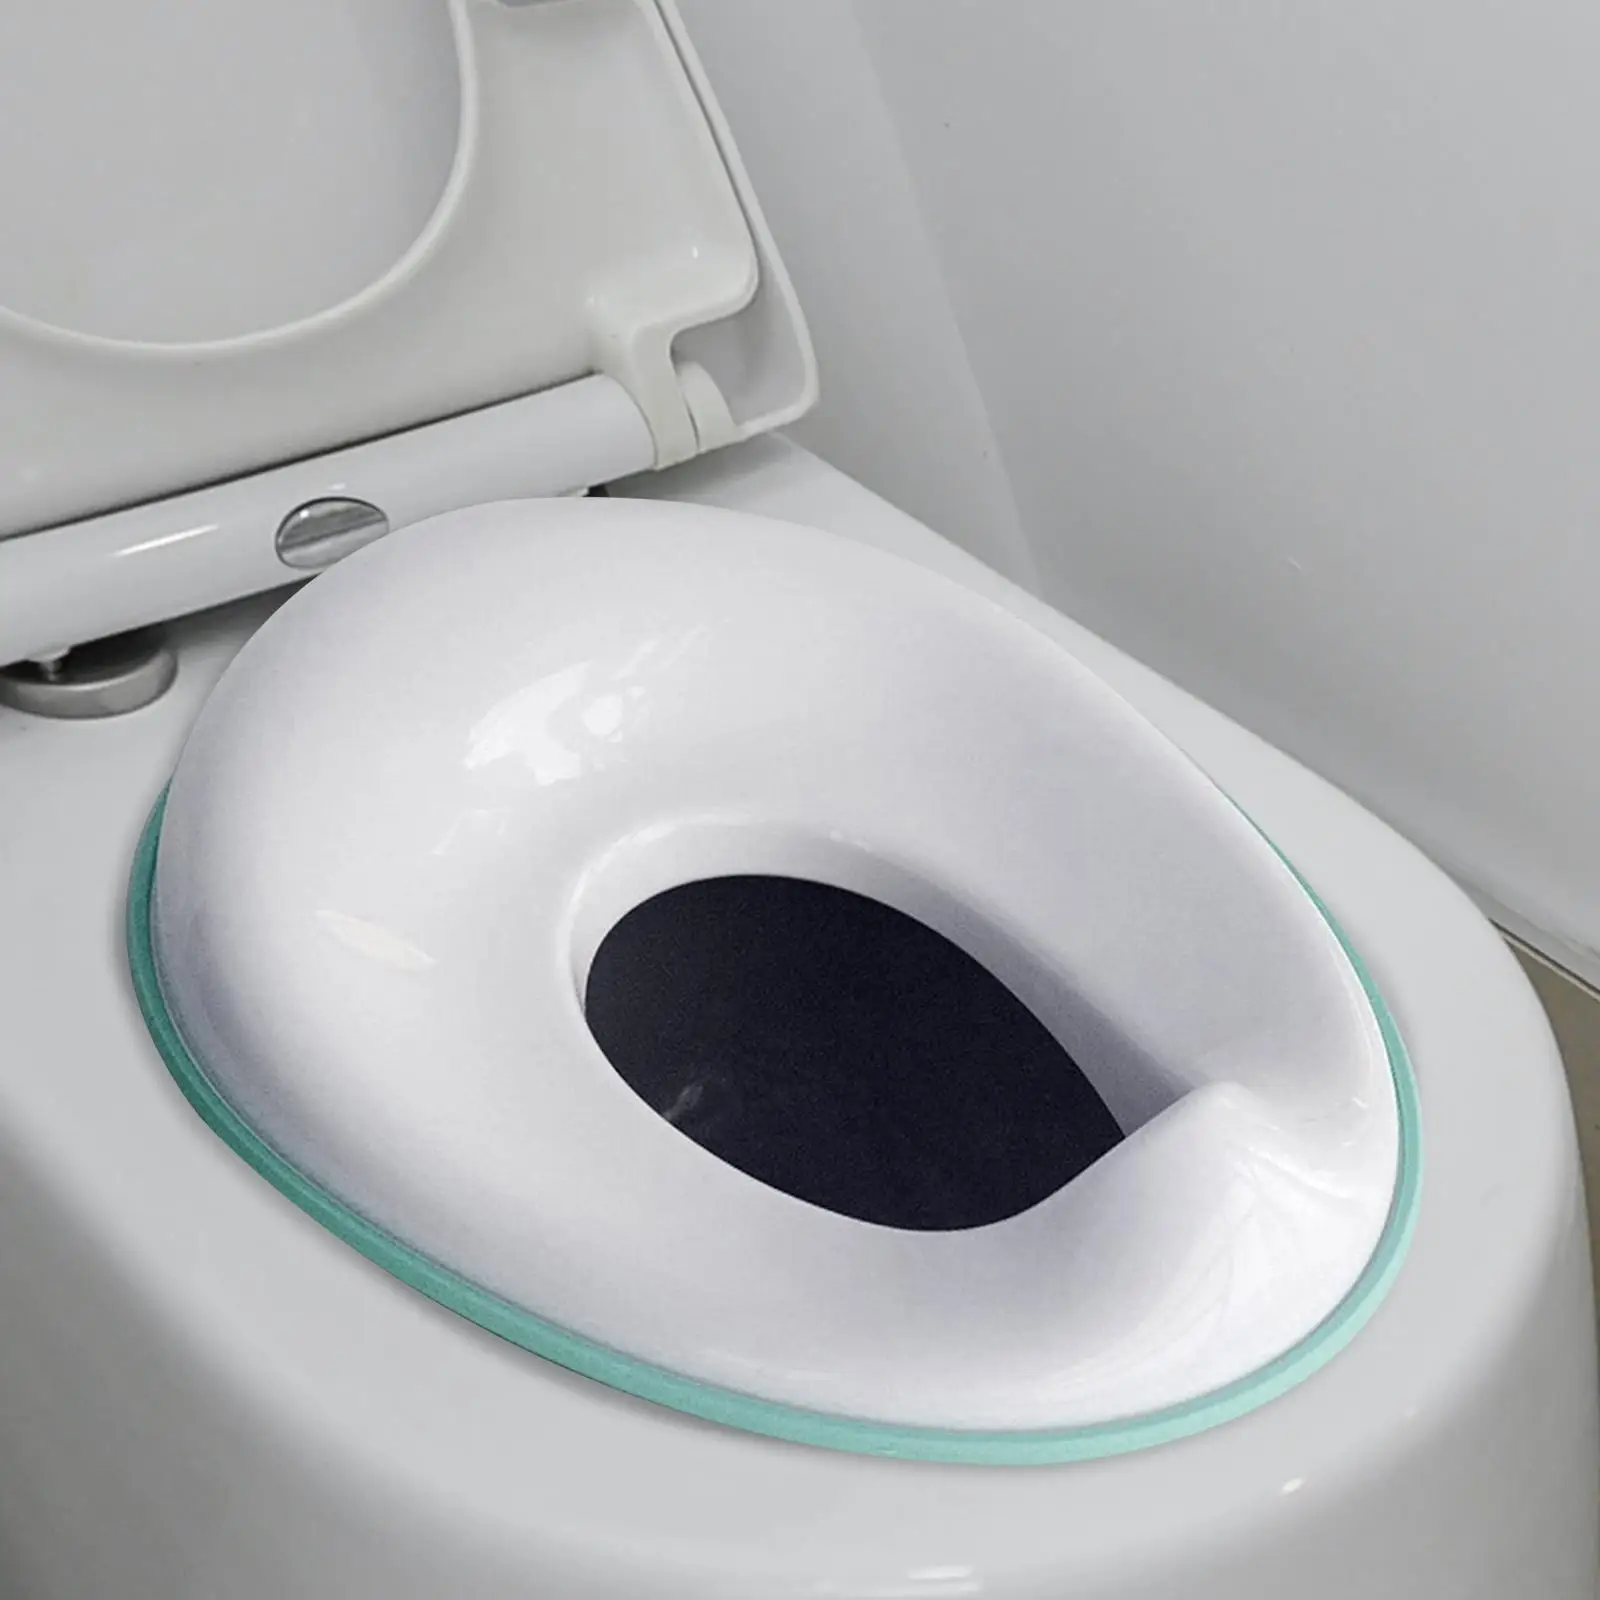 Toddler Toilet Seat Fits Most Toilets Space Saving with splash Has Storage Hook Non Slip Toilet Trainer